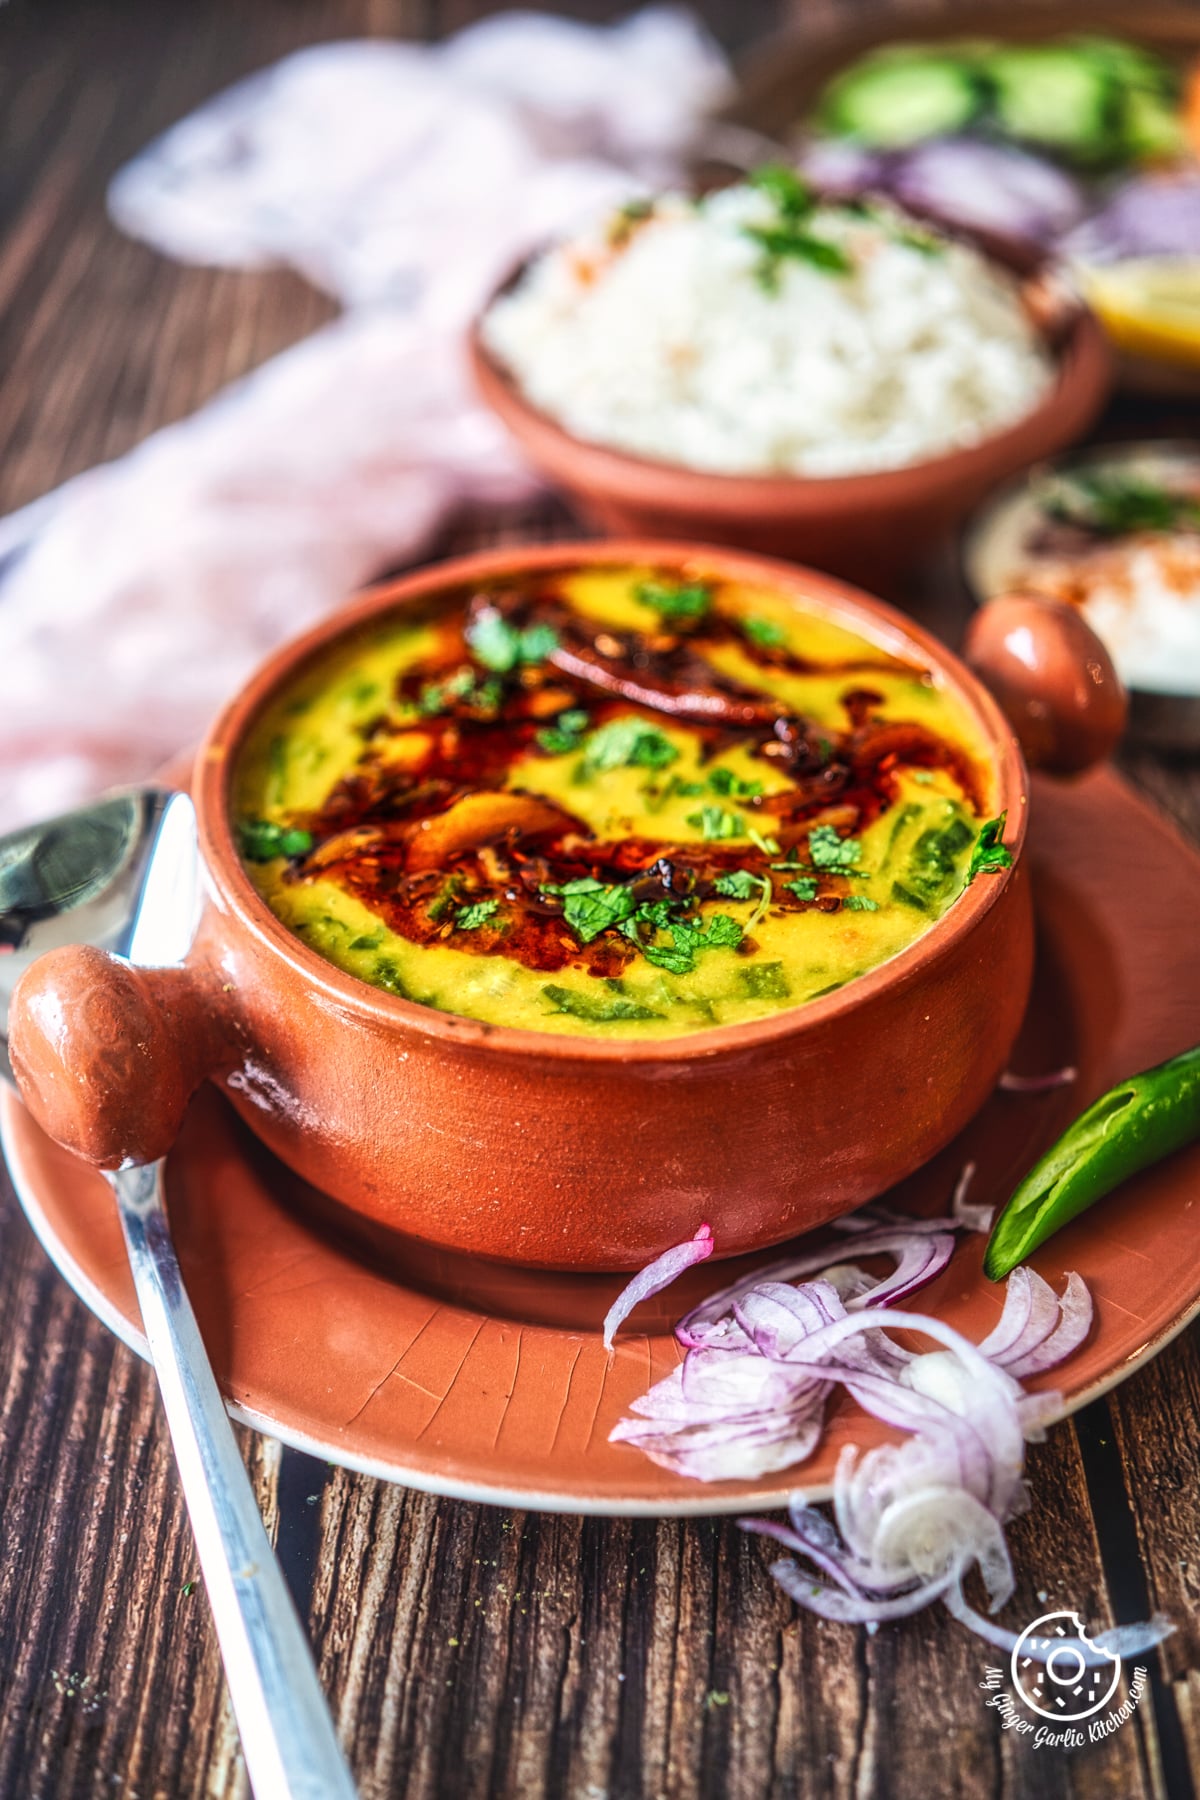 dal palak served in a terra cotta bowl with sliced onions and green chili on the side